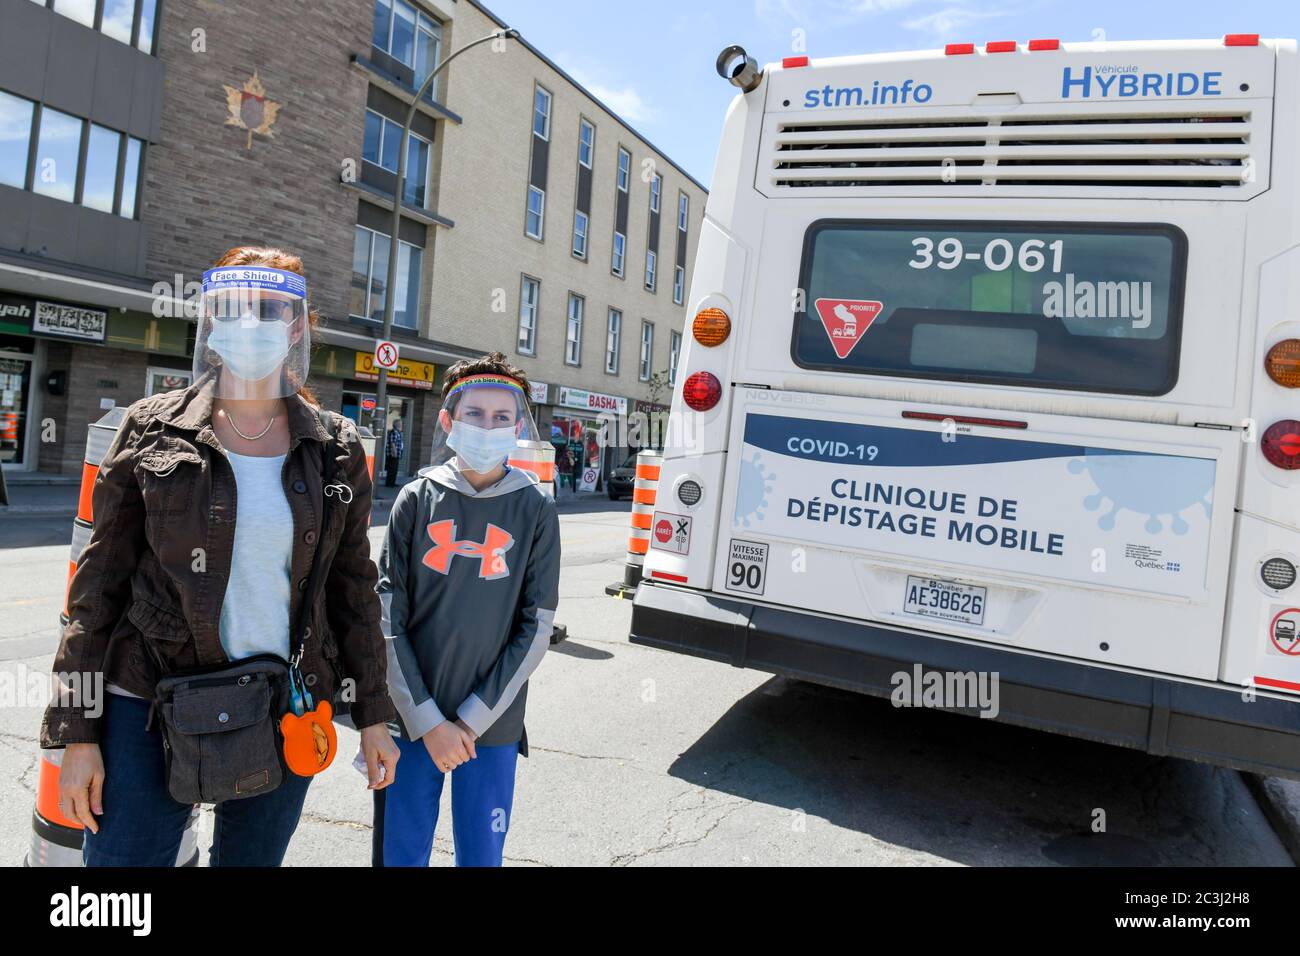 Mother & son wearing protective face masks and face shields during Covid-19 Pandemic standing in front of Covid19 mobile free testing clinic, Montreal Stock Photo